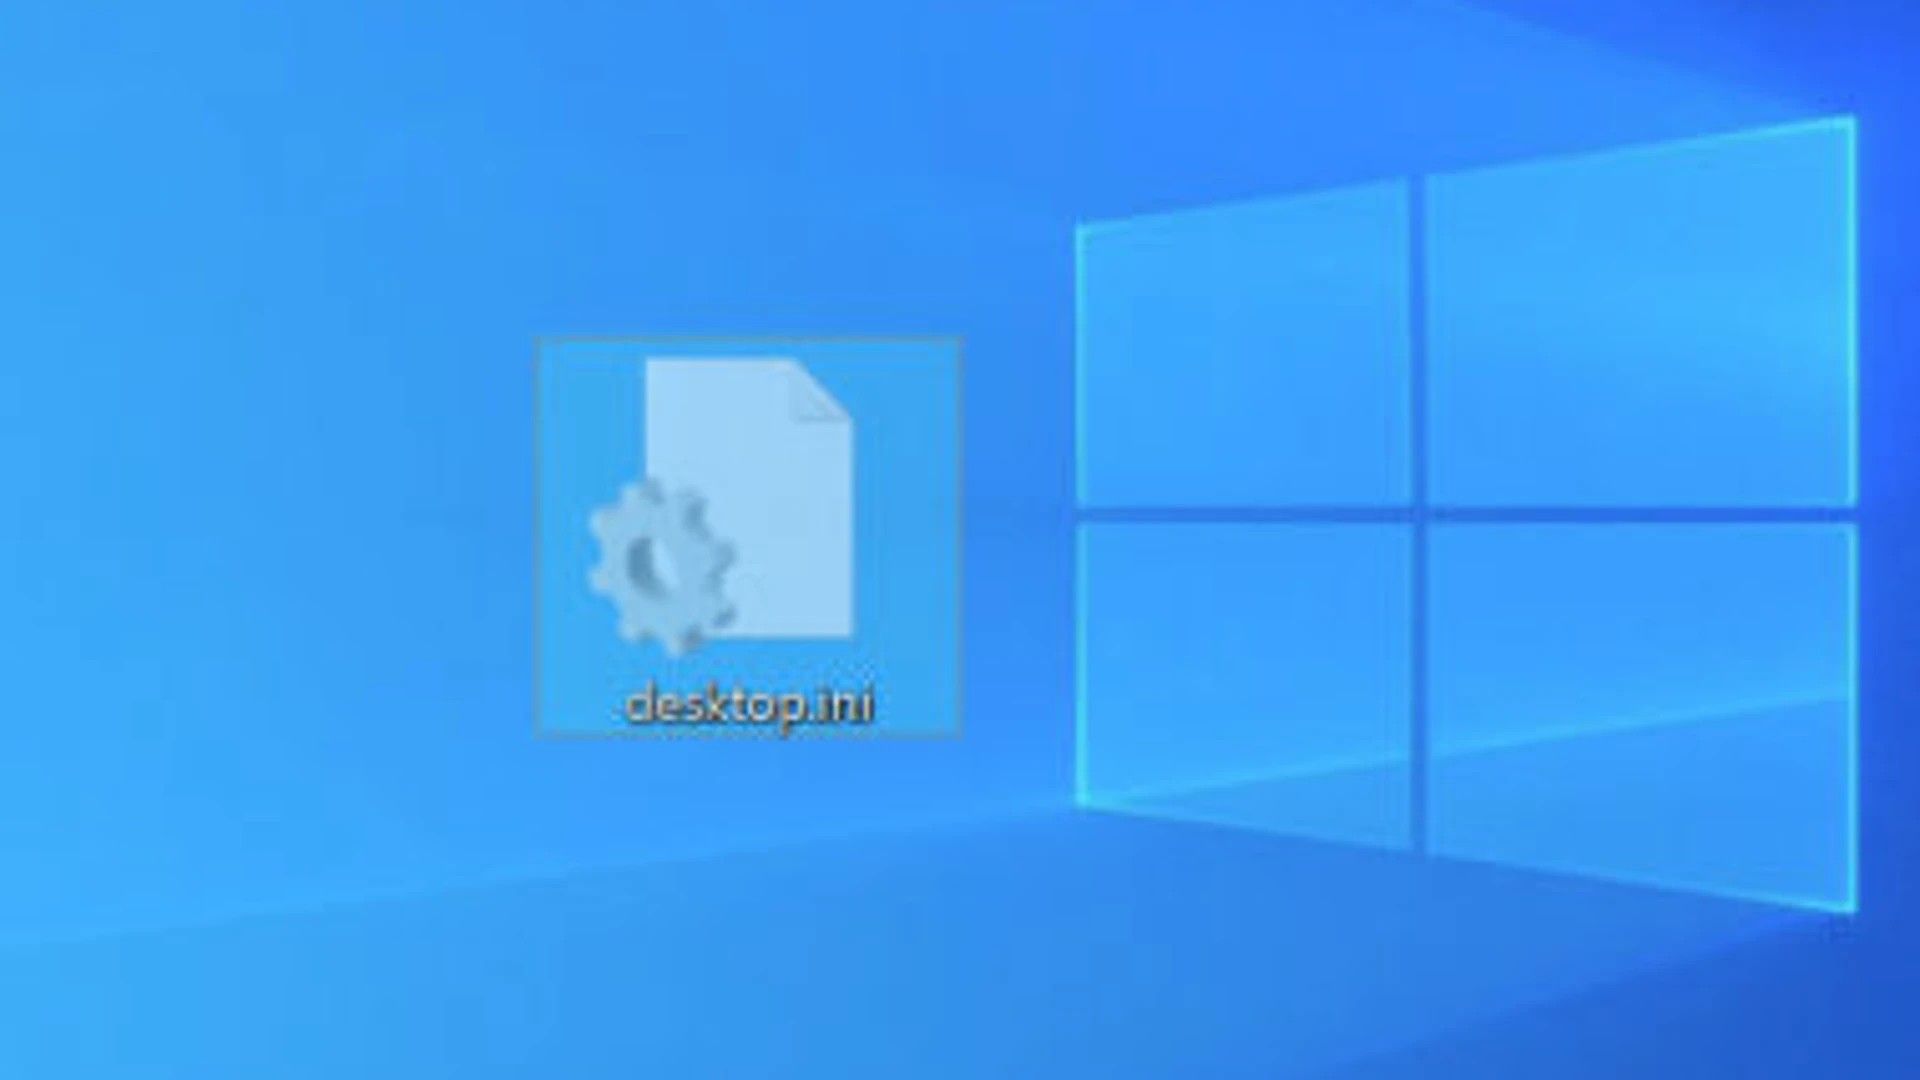 Desktop.ini file opens automatically on startup in Windows 11/10